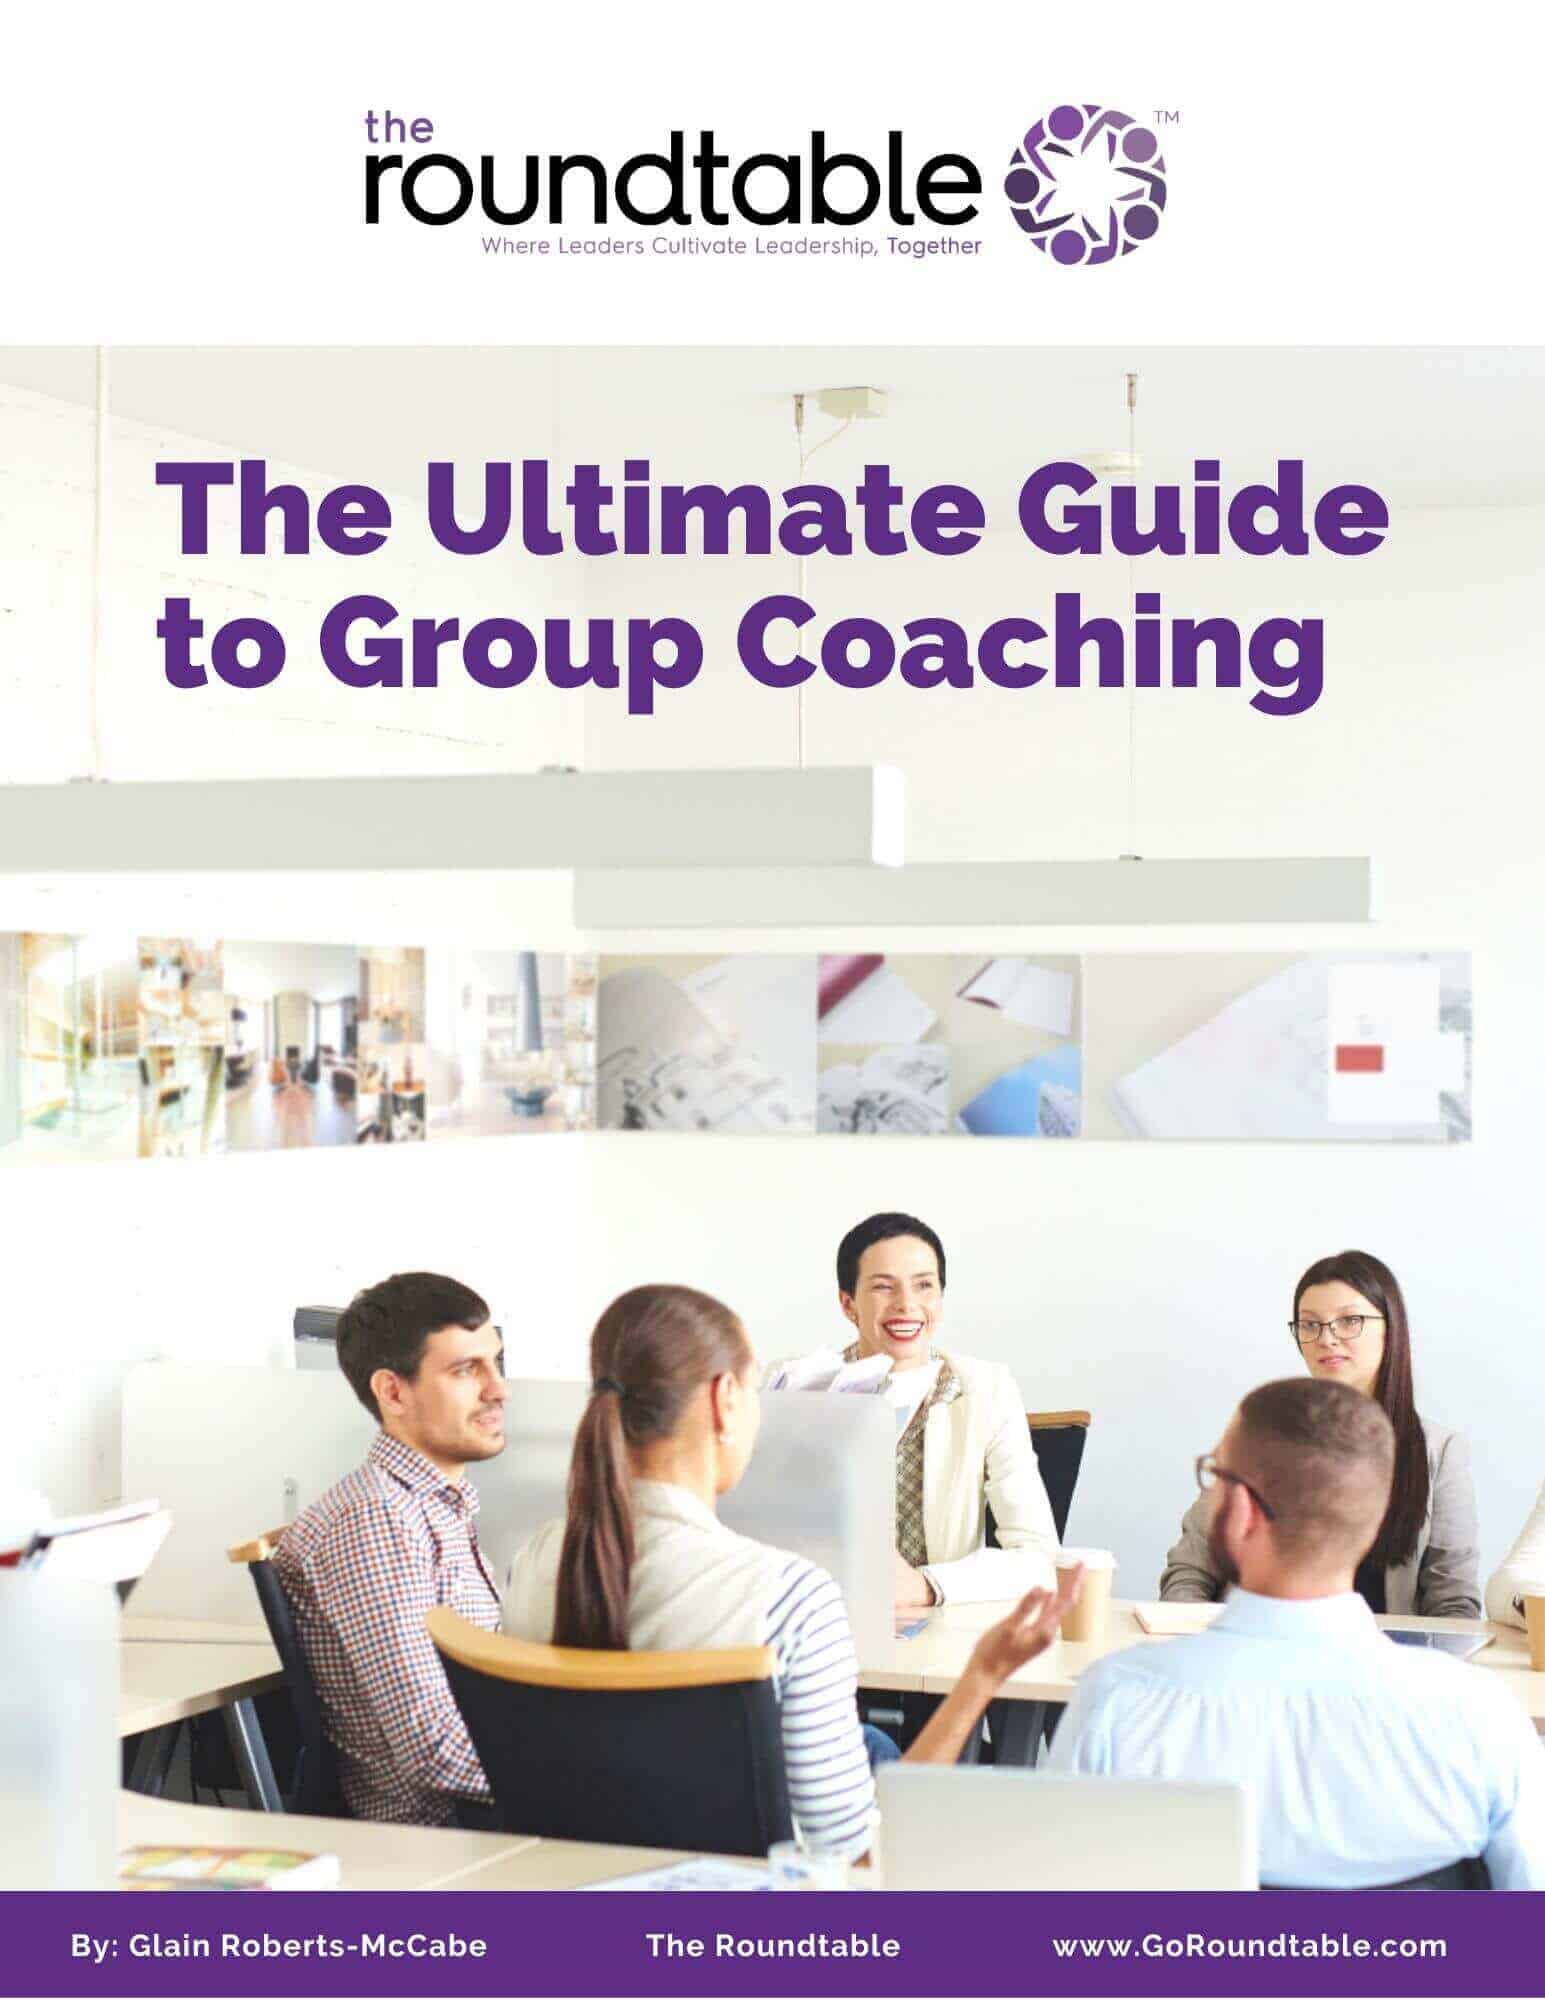 The Ultimate Guide to Group Coaching